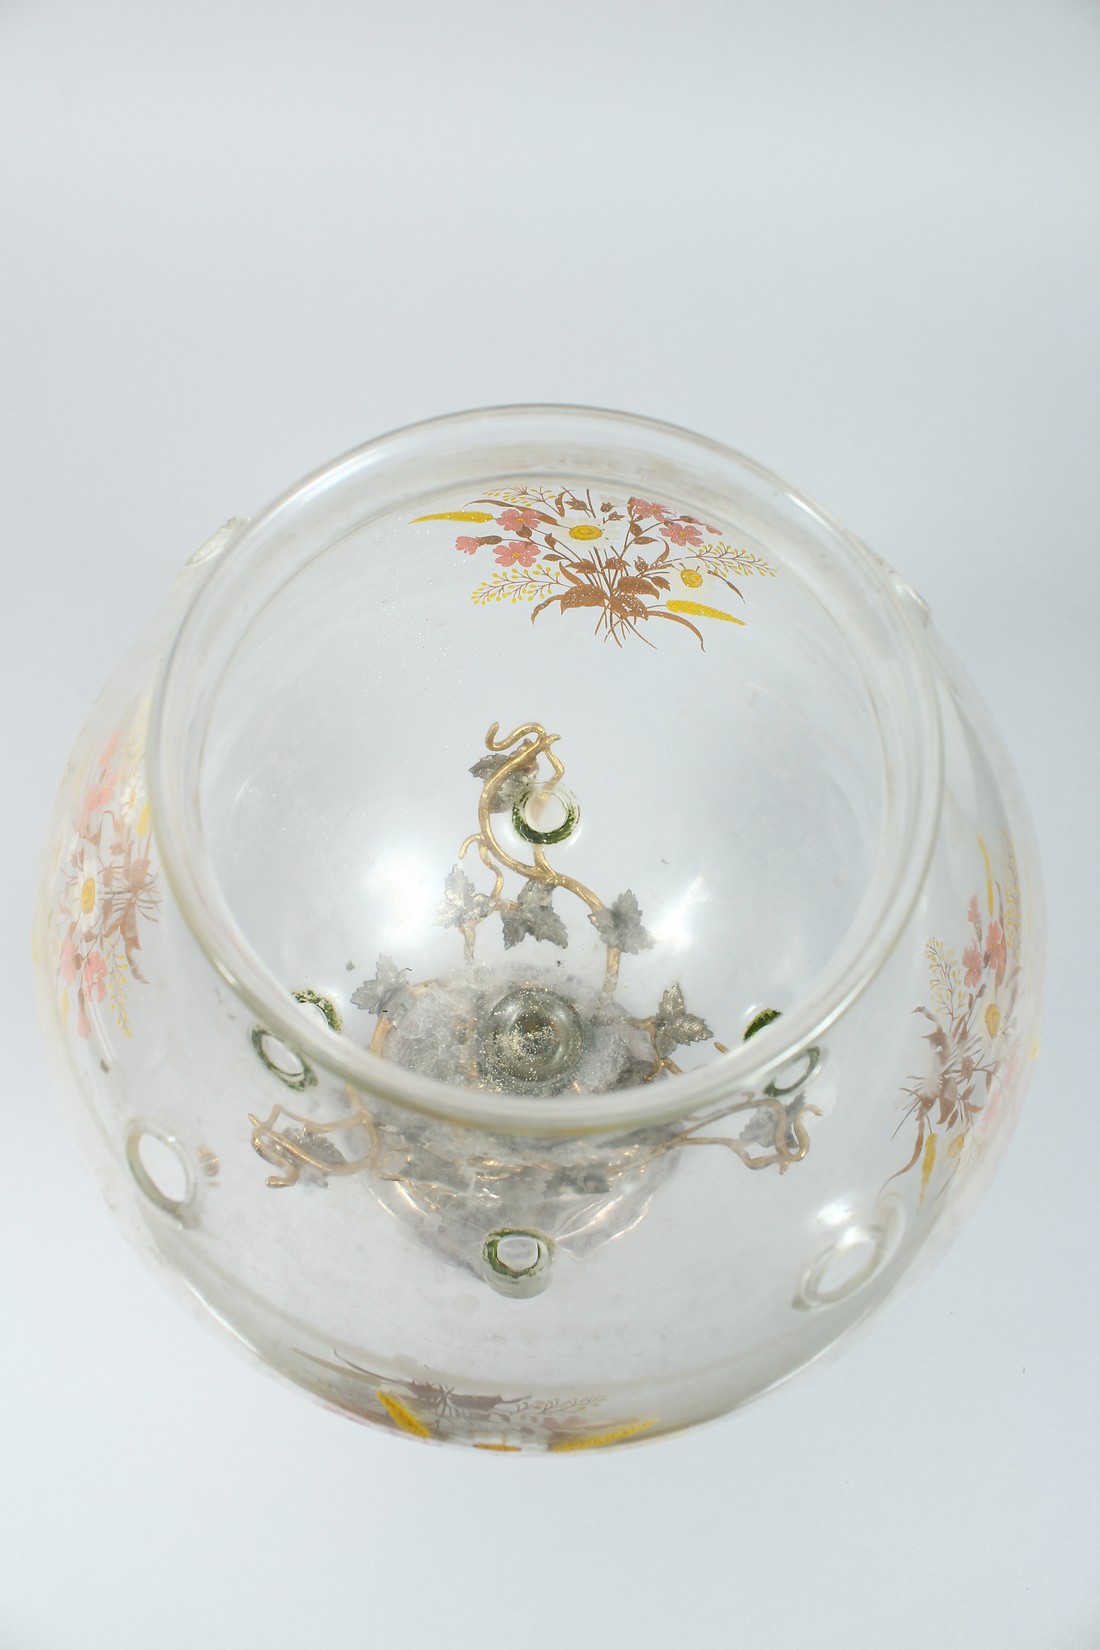 AN UNUSUAL SILVER-PLATED ORMOLU AND GLASS PEDESTAL BOWL, the bowl decorated with flowers on a - Image 6 of 8